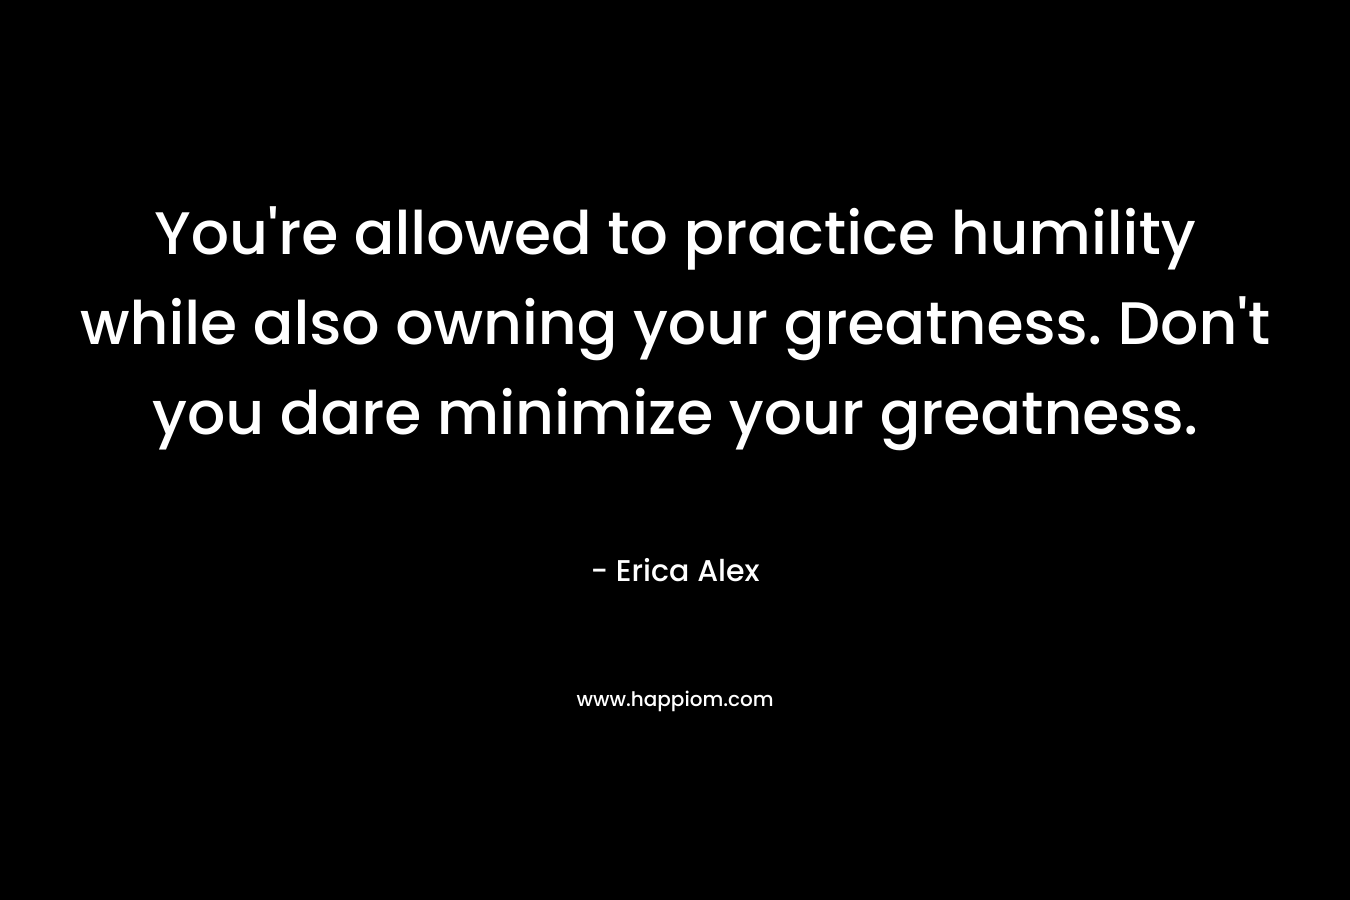 You’re allowed to practice humility while also owning your greatness. Don’t you dare minimize your greatness. – Erica Alex